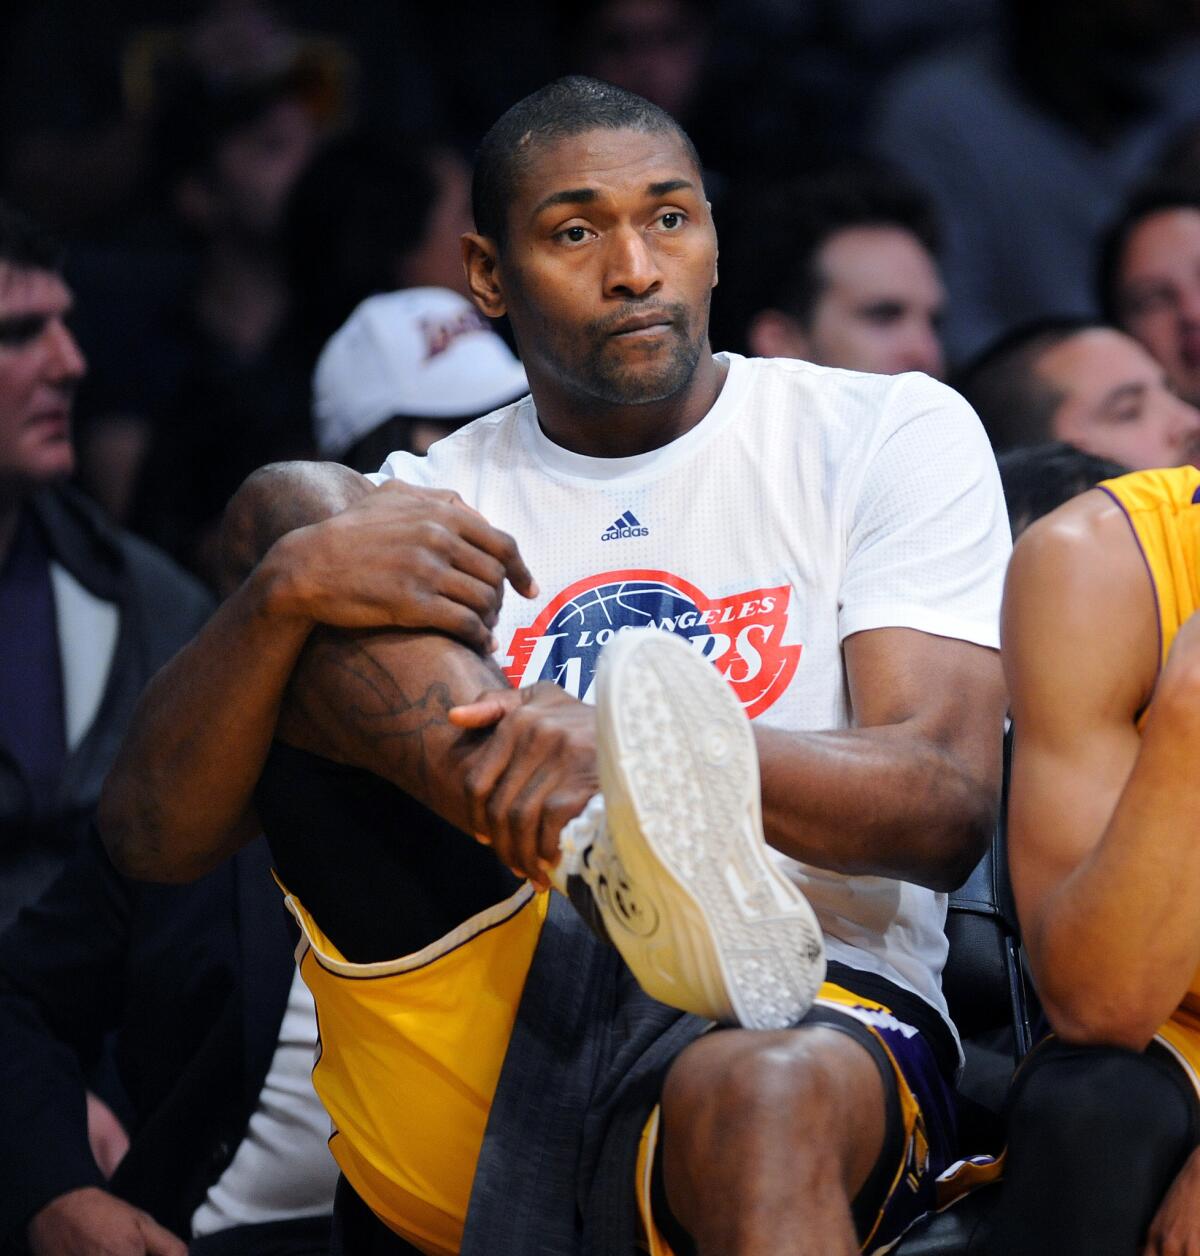 Los Angeles Lakers small forward Metta World Peace, right, works